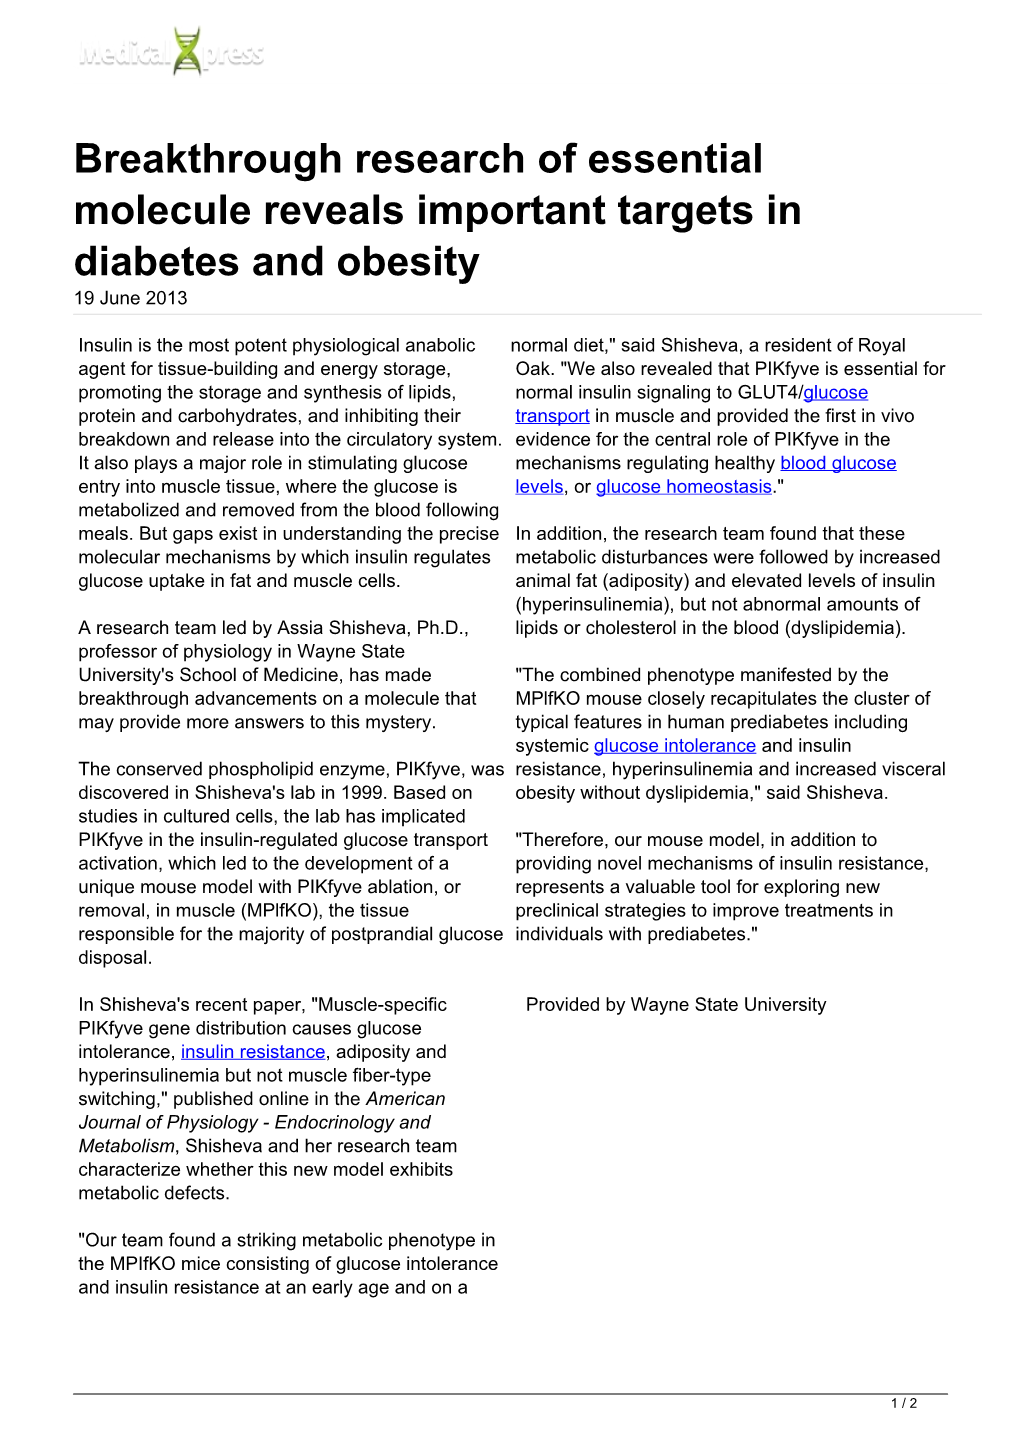 Breakthrough Research of Essential Molecule Reveals Important Targets in Diabetes and Obesity 19 June 2013